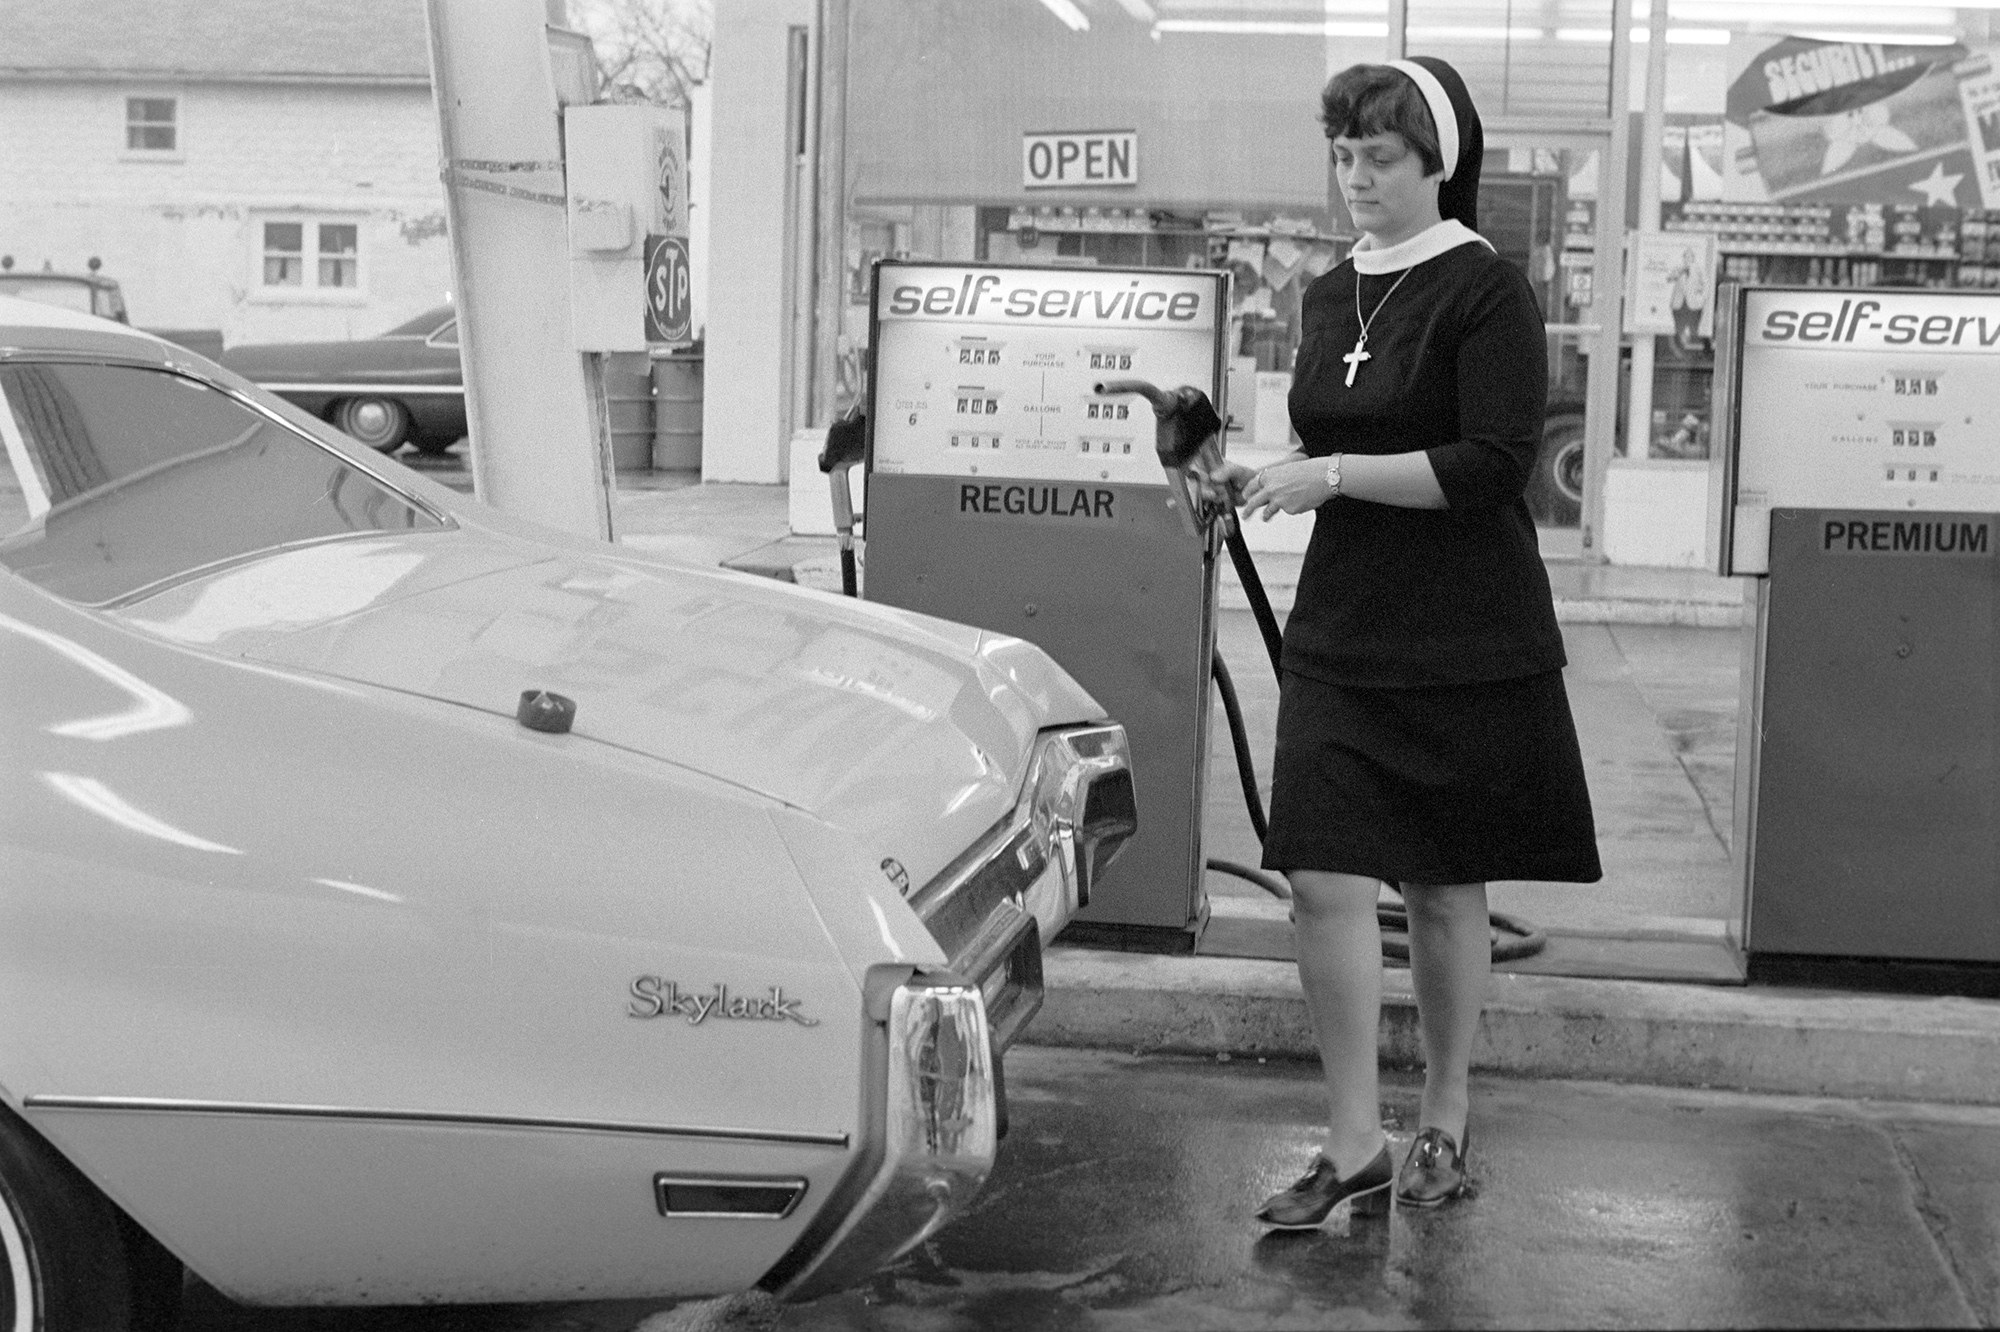 A nun wearing a habit and cross necklace carries a gas pump at a station